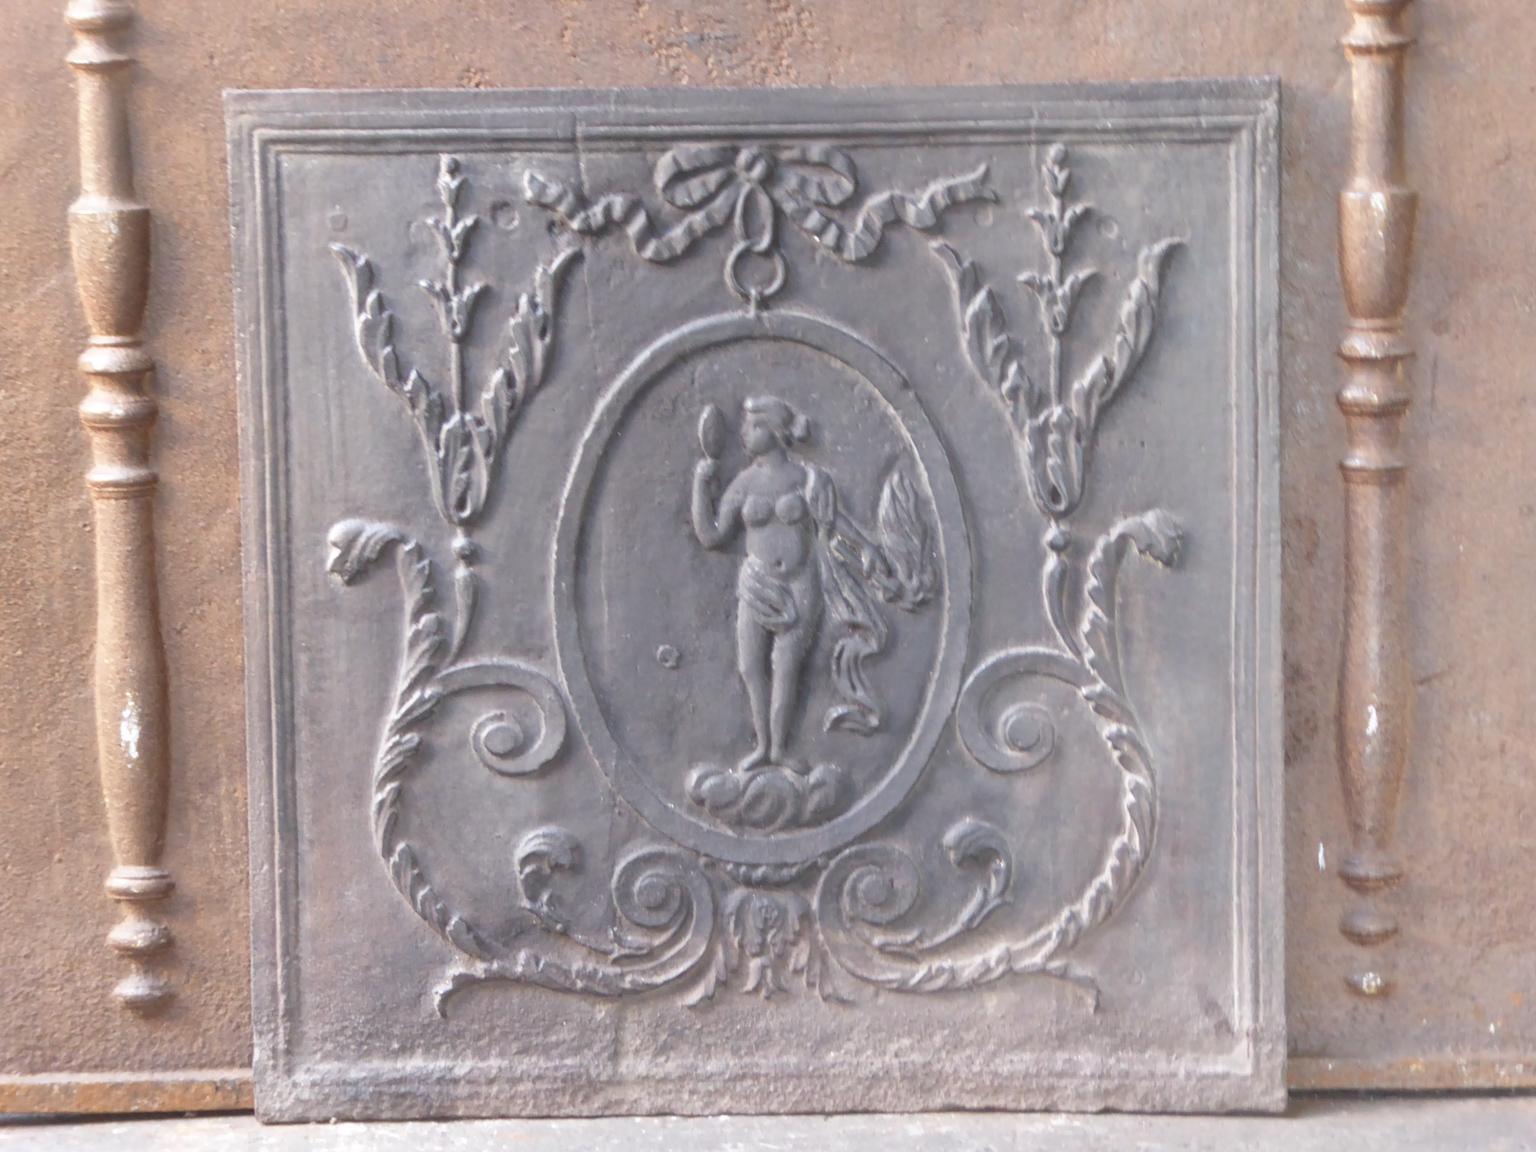 19th century French fireback with Venus. Venus with her ??mirror and torch of Hestia. Goddess of love, beauty and fertility. The torch is the symbol of Hestia, goddess of fire and more specifically the domestic hearth. Where no fire is found, a